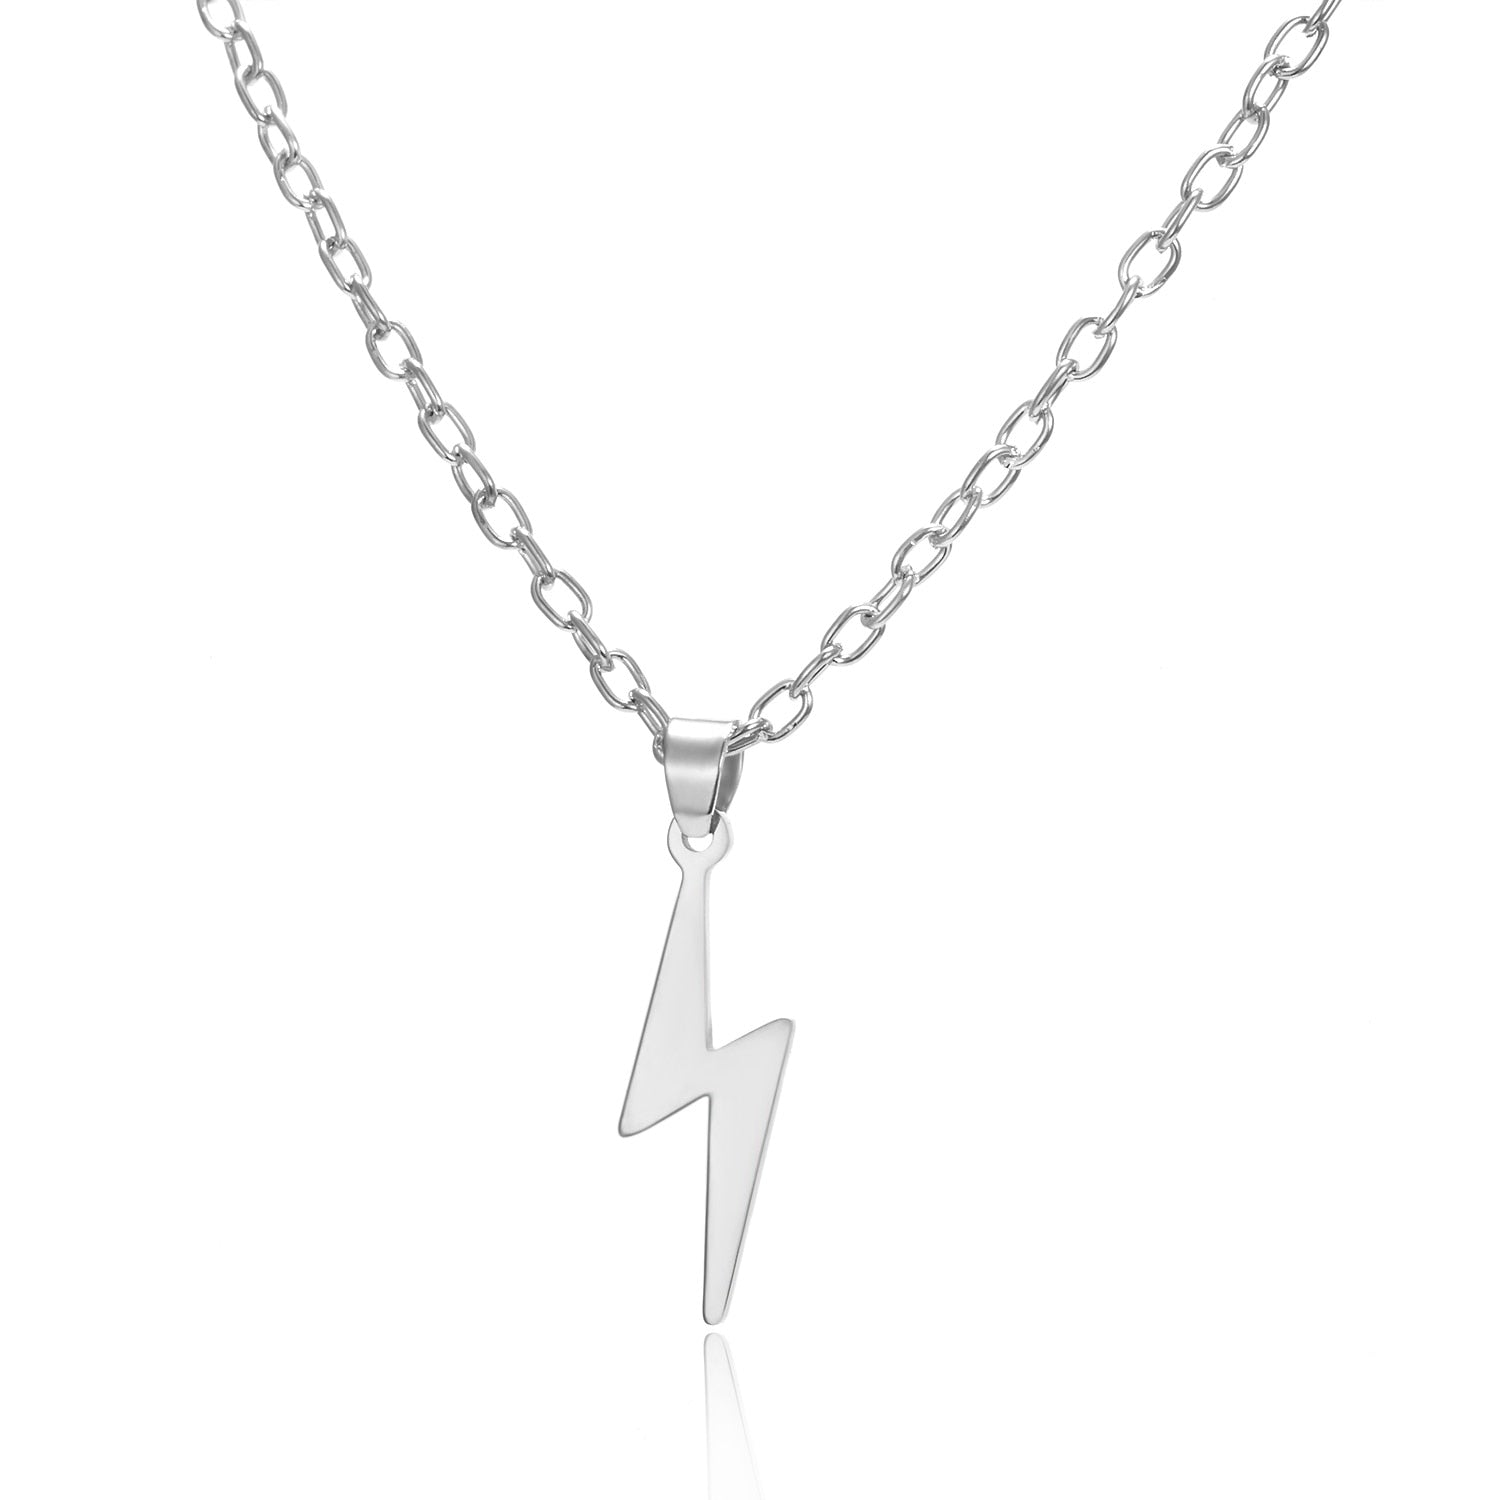 Rinhoo Stainless Steel Necklace For Men - My Store